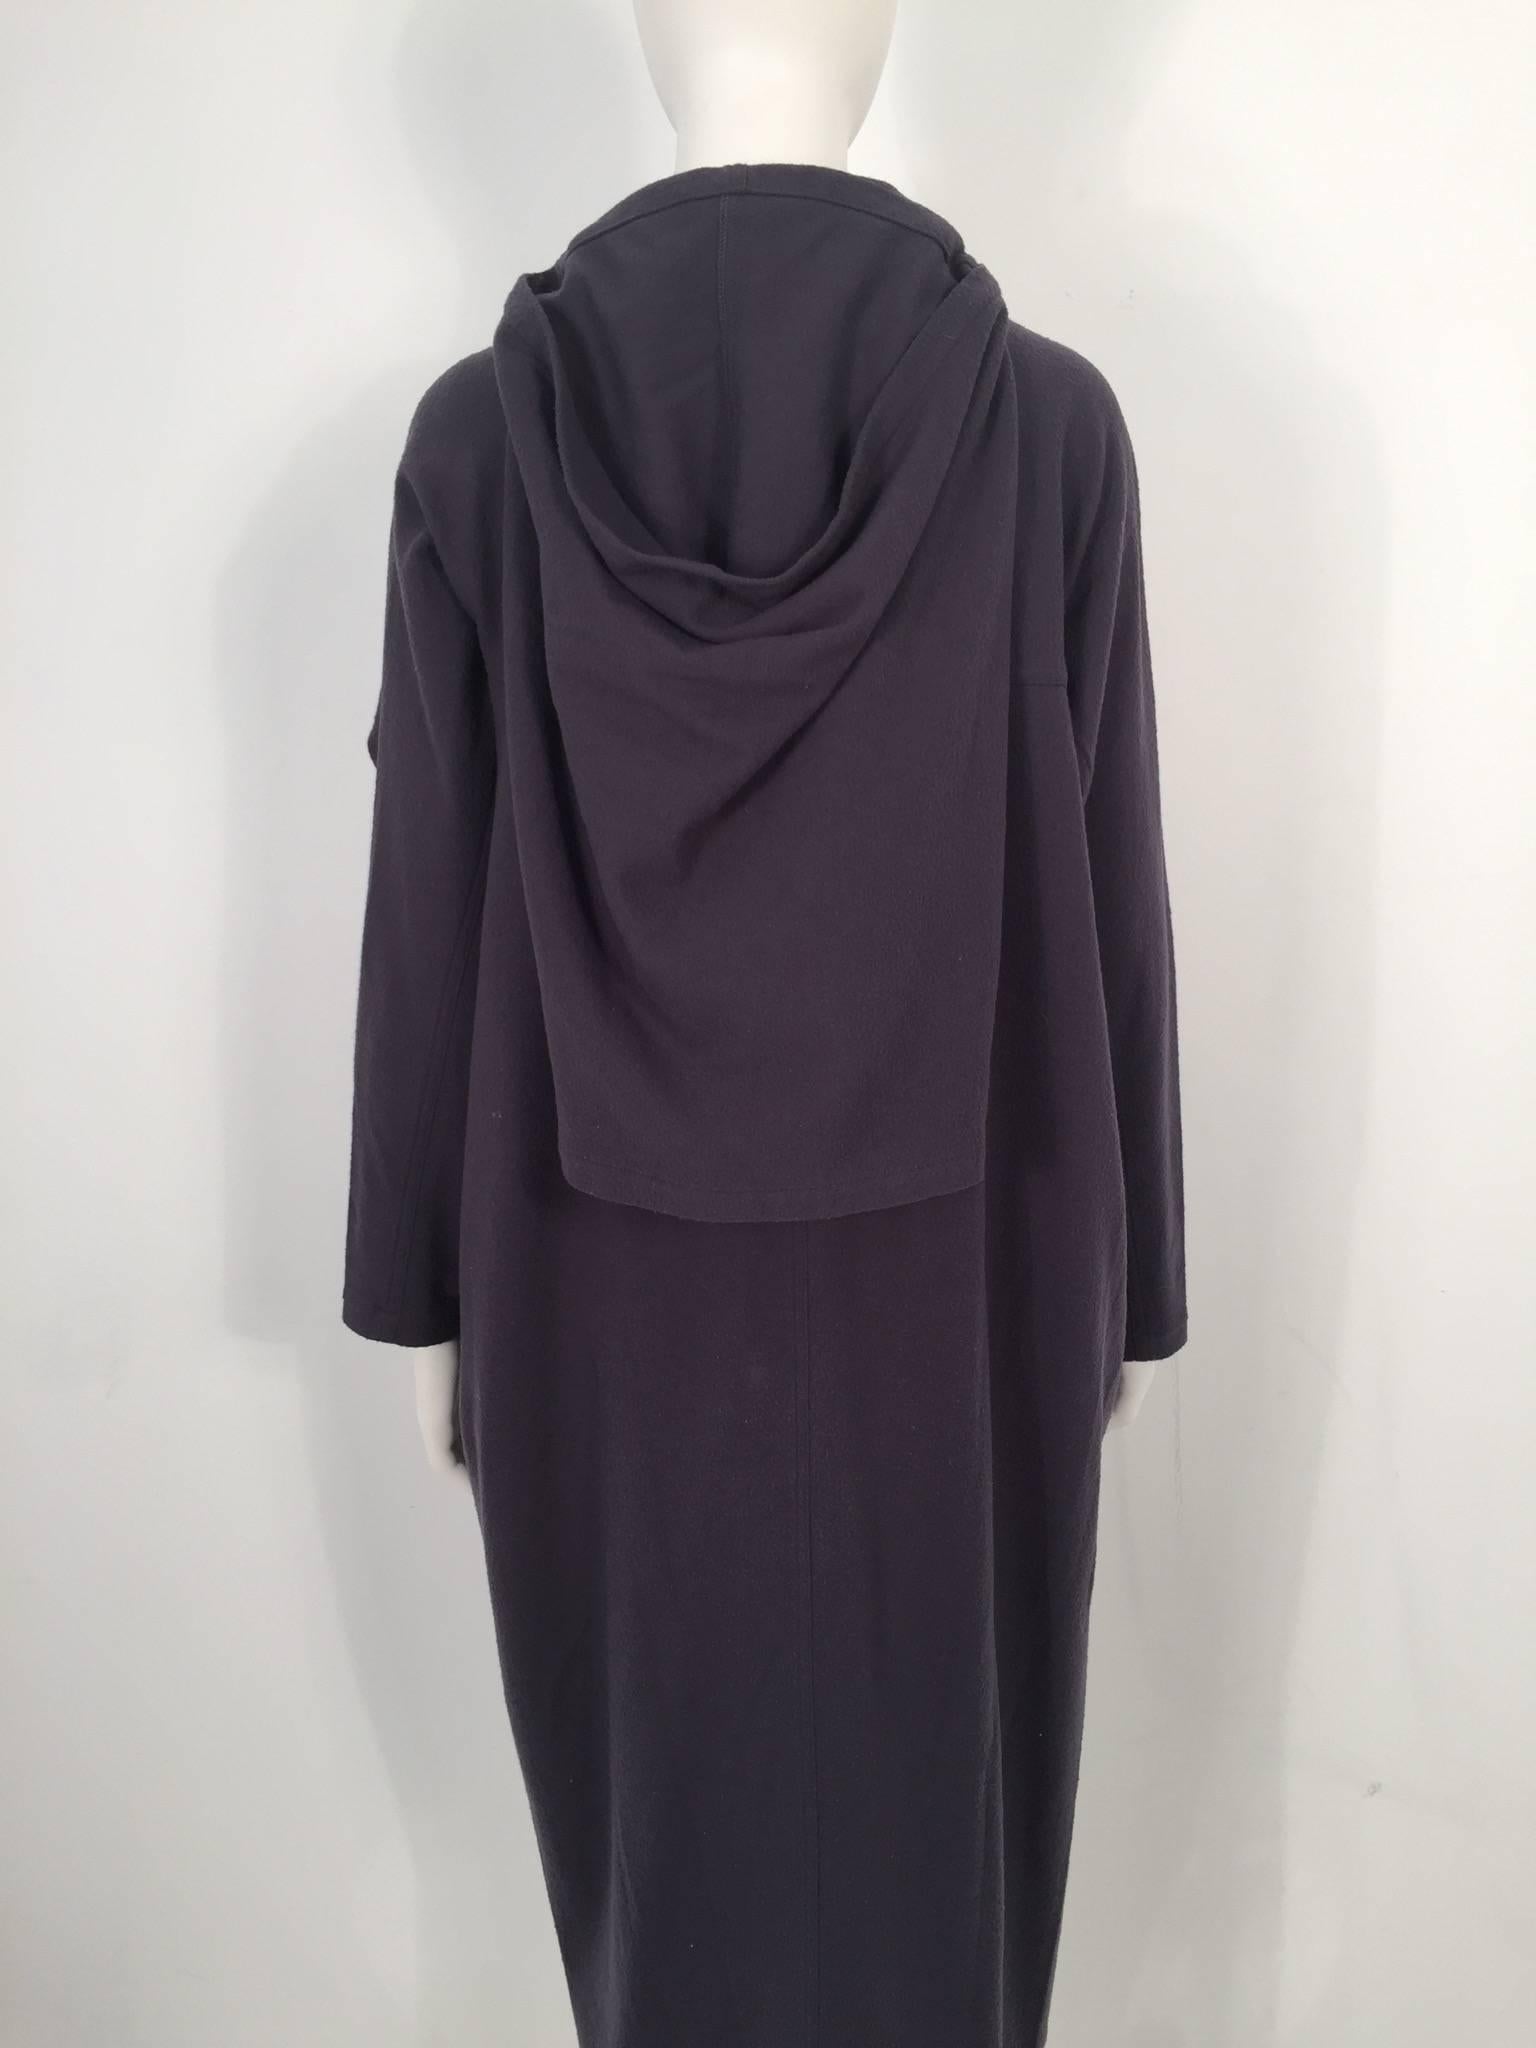 Issey Miyake Iconic Hooded Dress For Sale 3